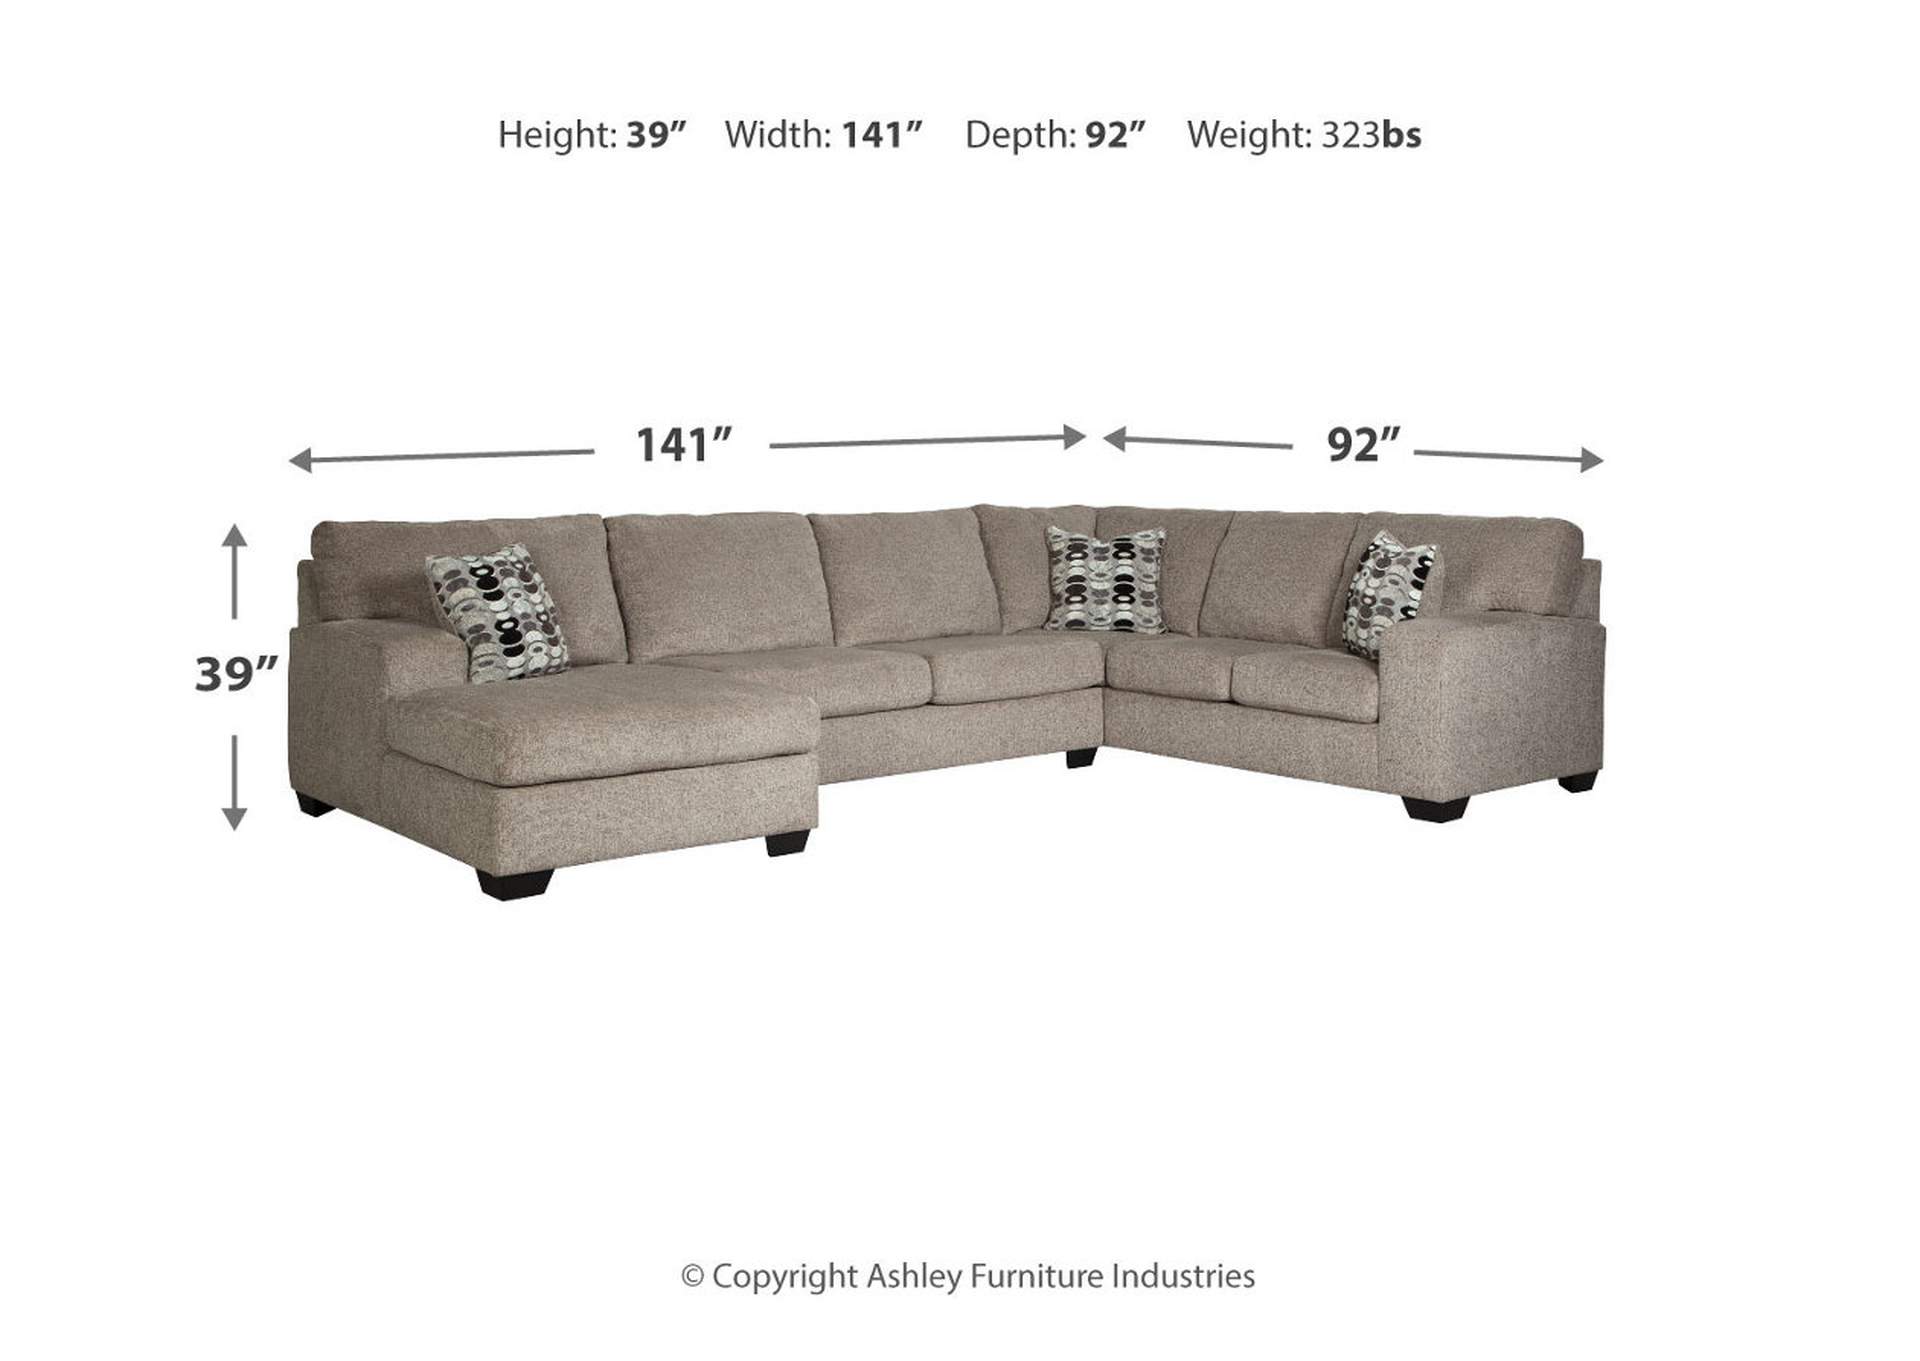 Ballinasloe 3-Piece Sectional with Chaise,Signature Design By Ashley